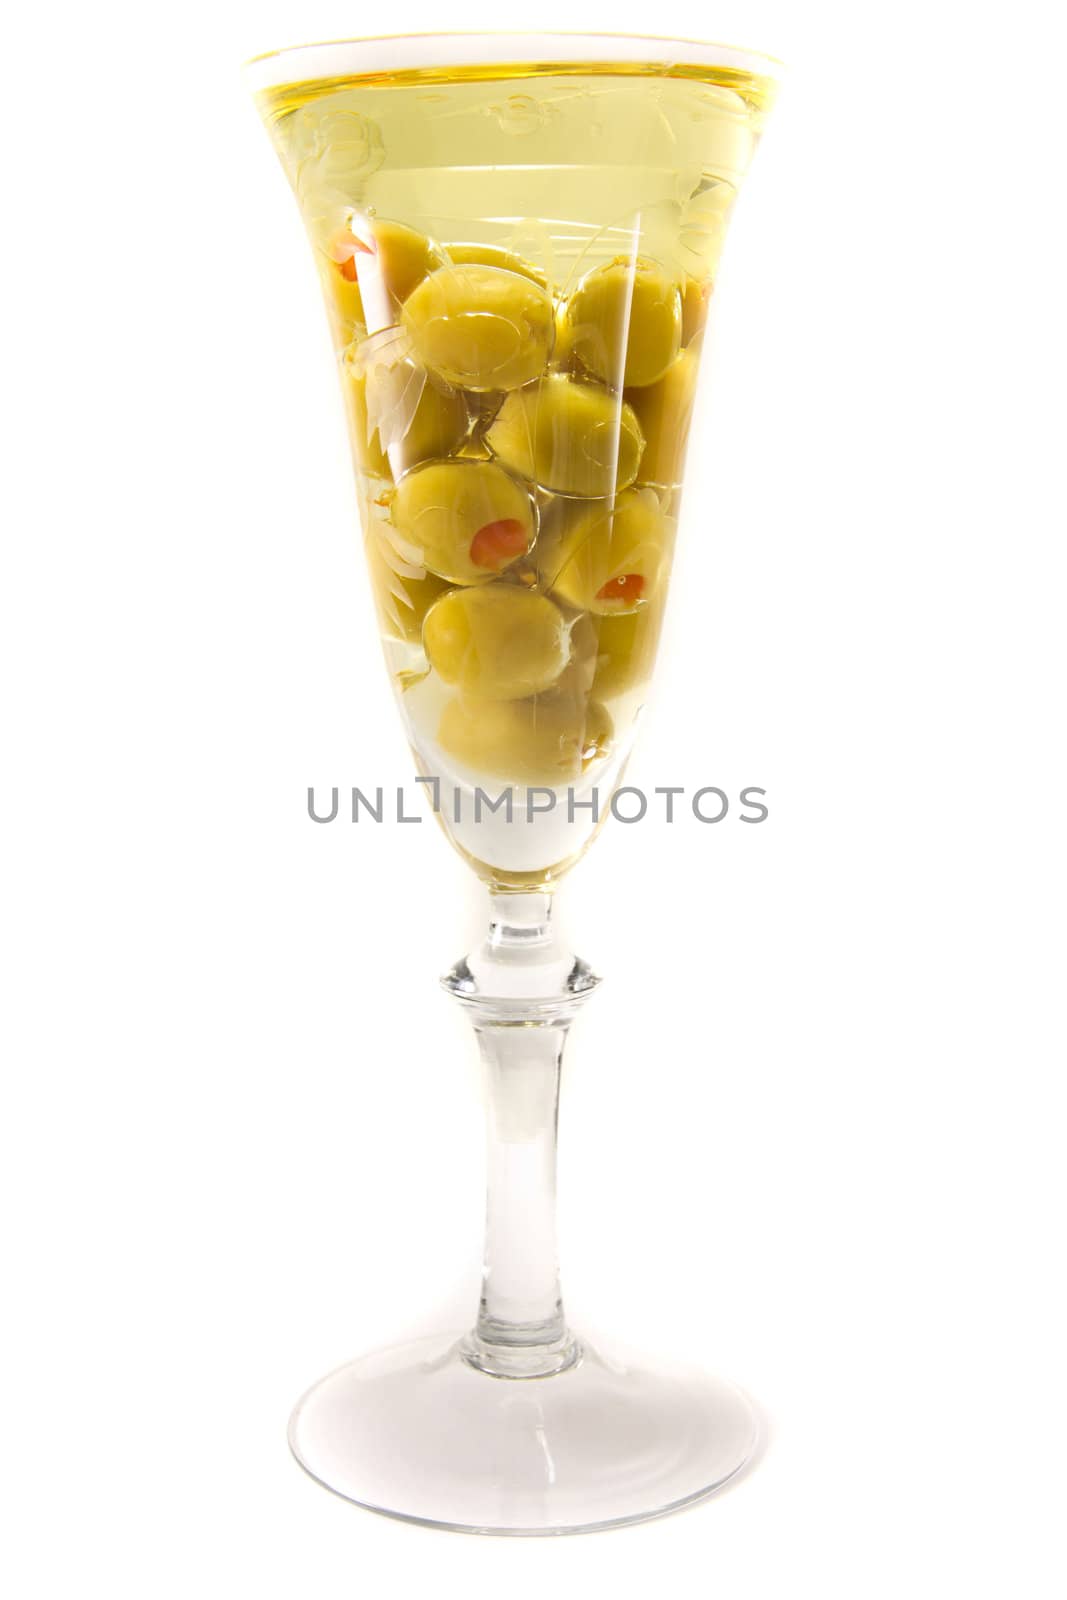 Picture of a wine glass with olive oil inside